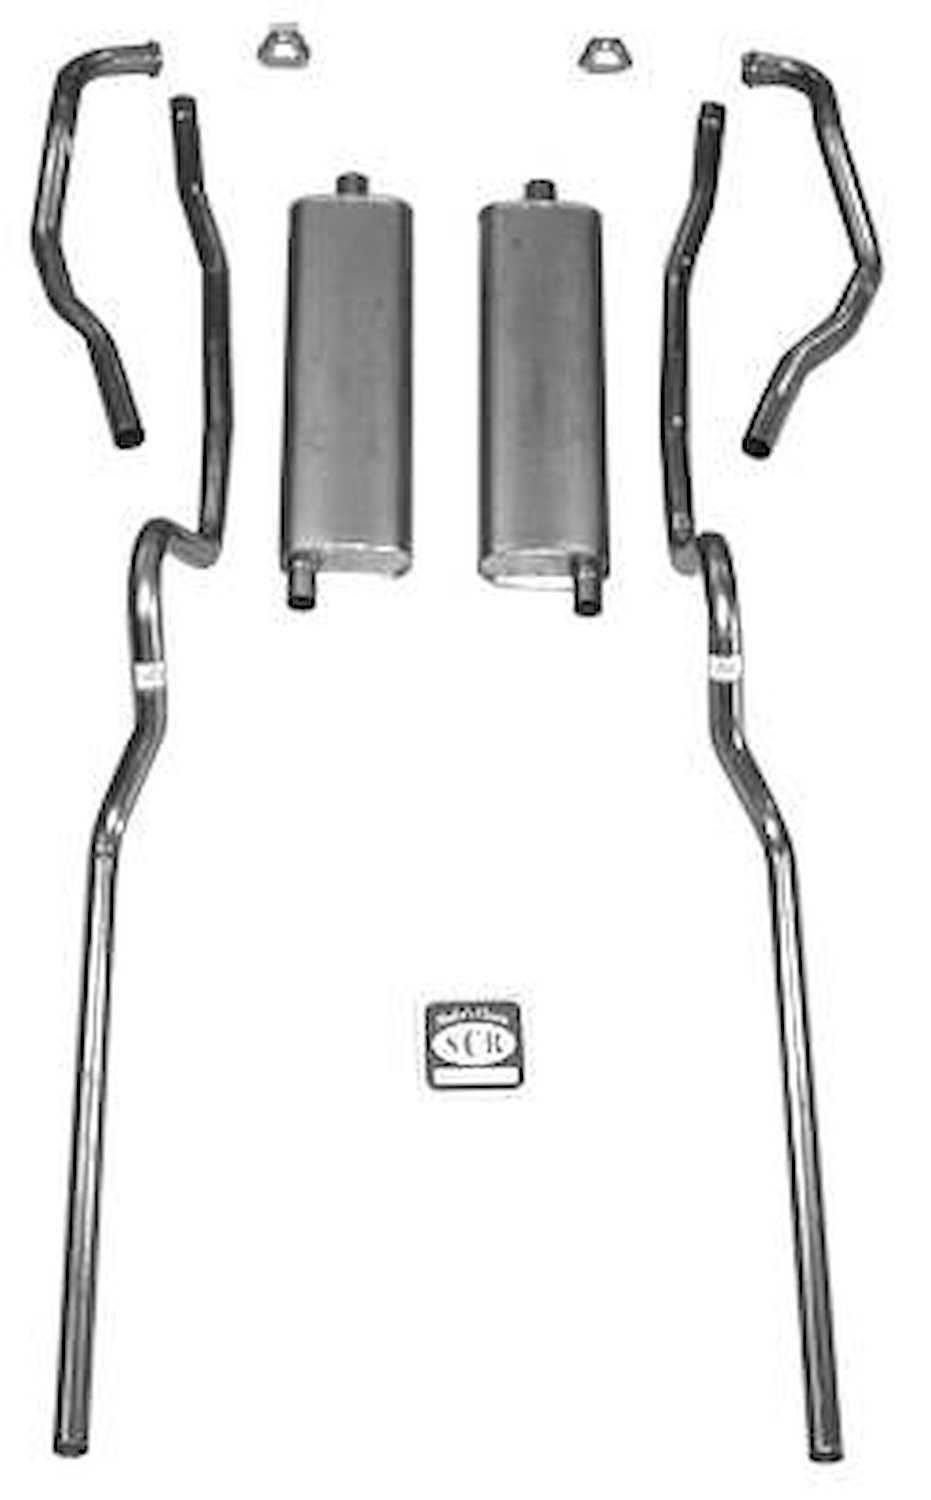 63048S 1955 Chevrolet Full-Size 8-cyl w/ Dual Exhaust System, 304 Stainless Steel